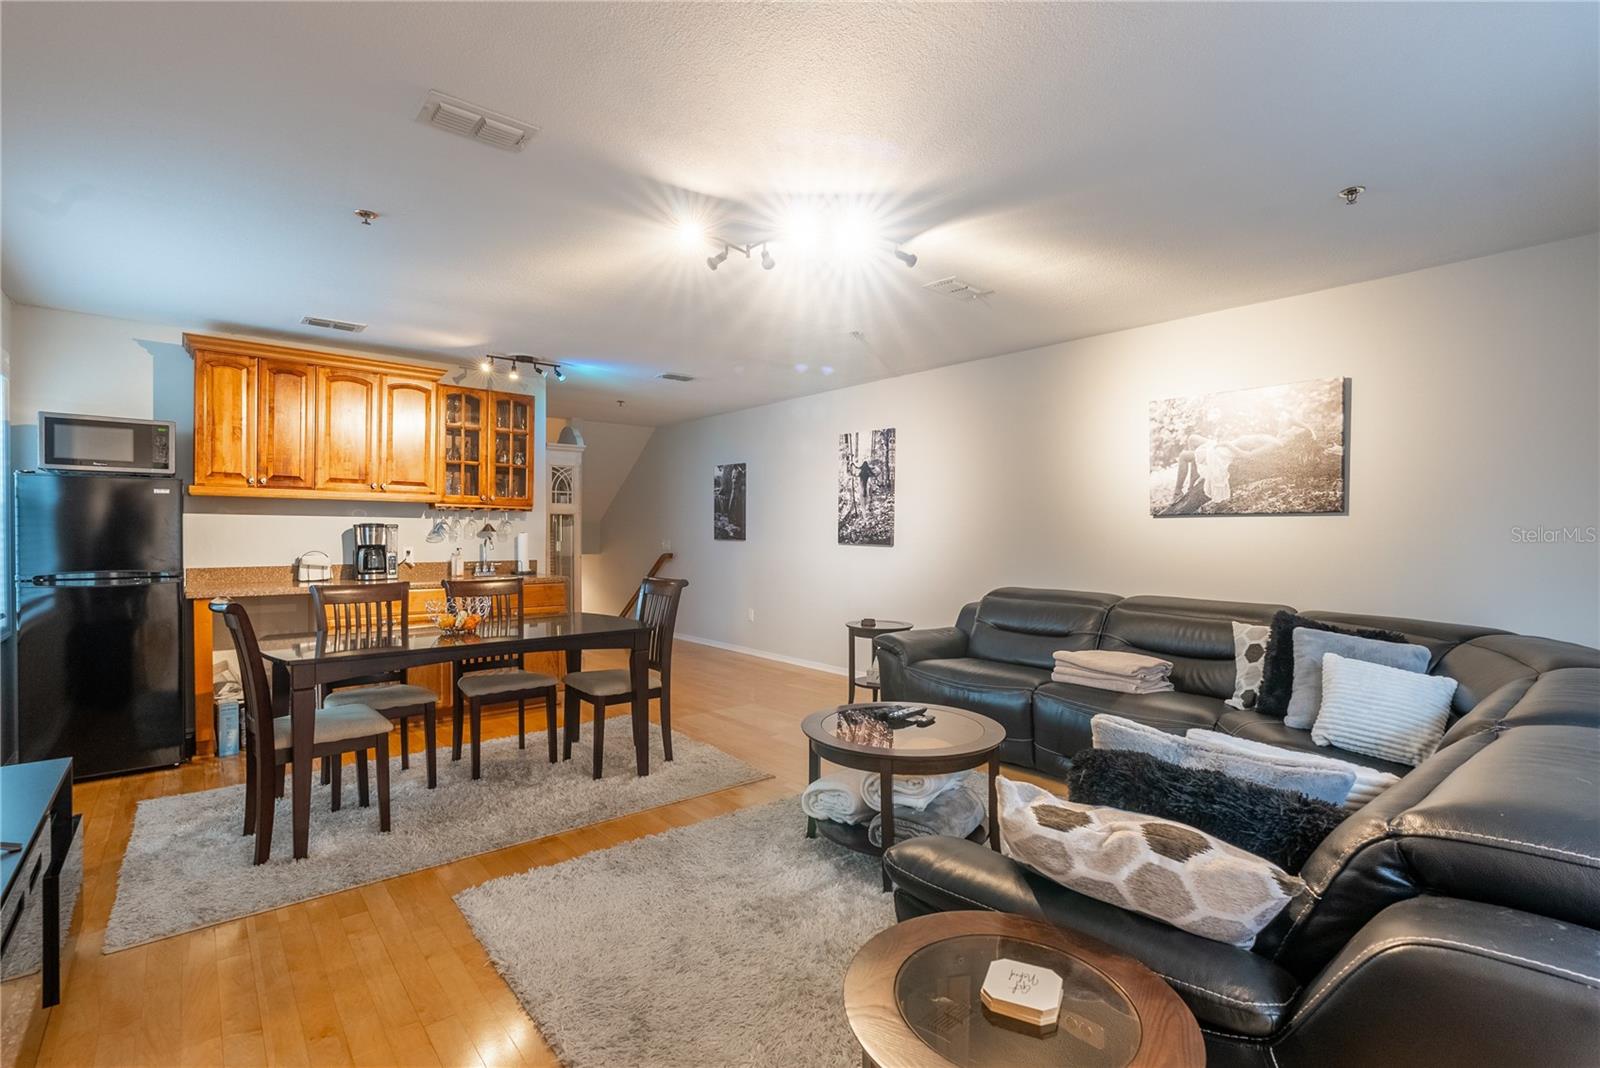 The living room has cabinets, a wet bar and refrigerator that will convey.